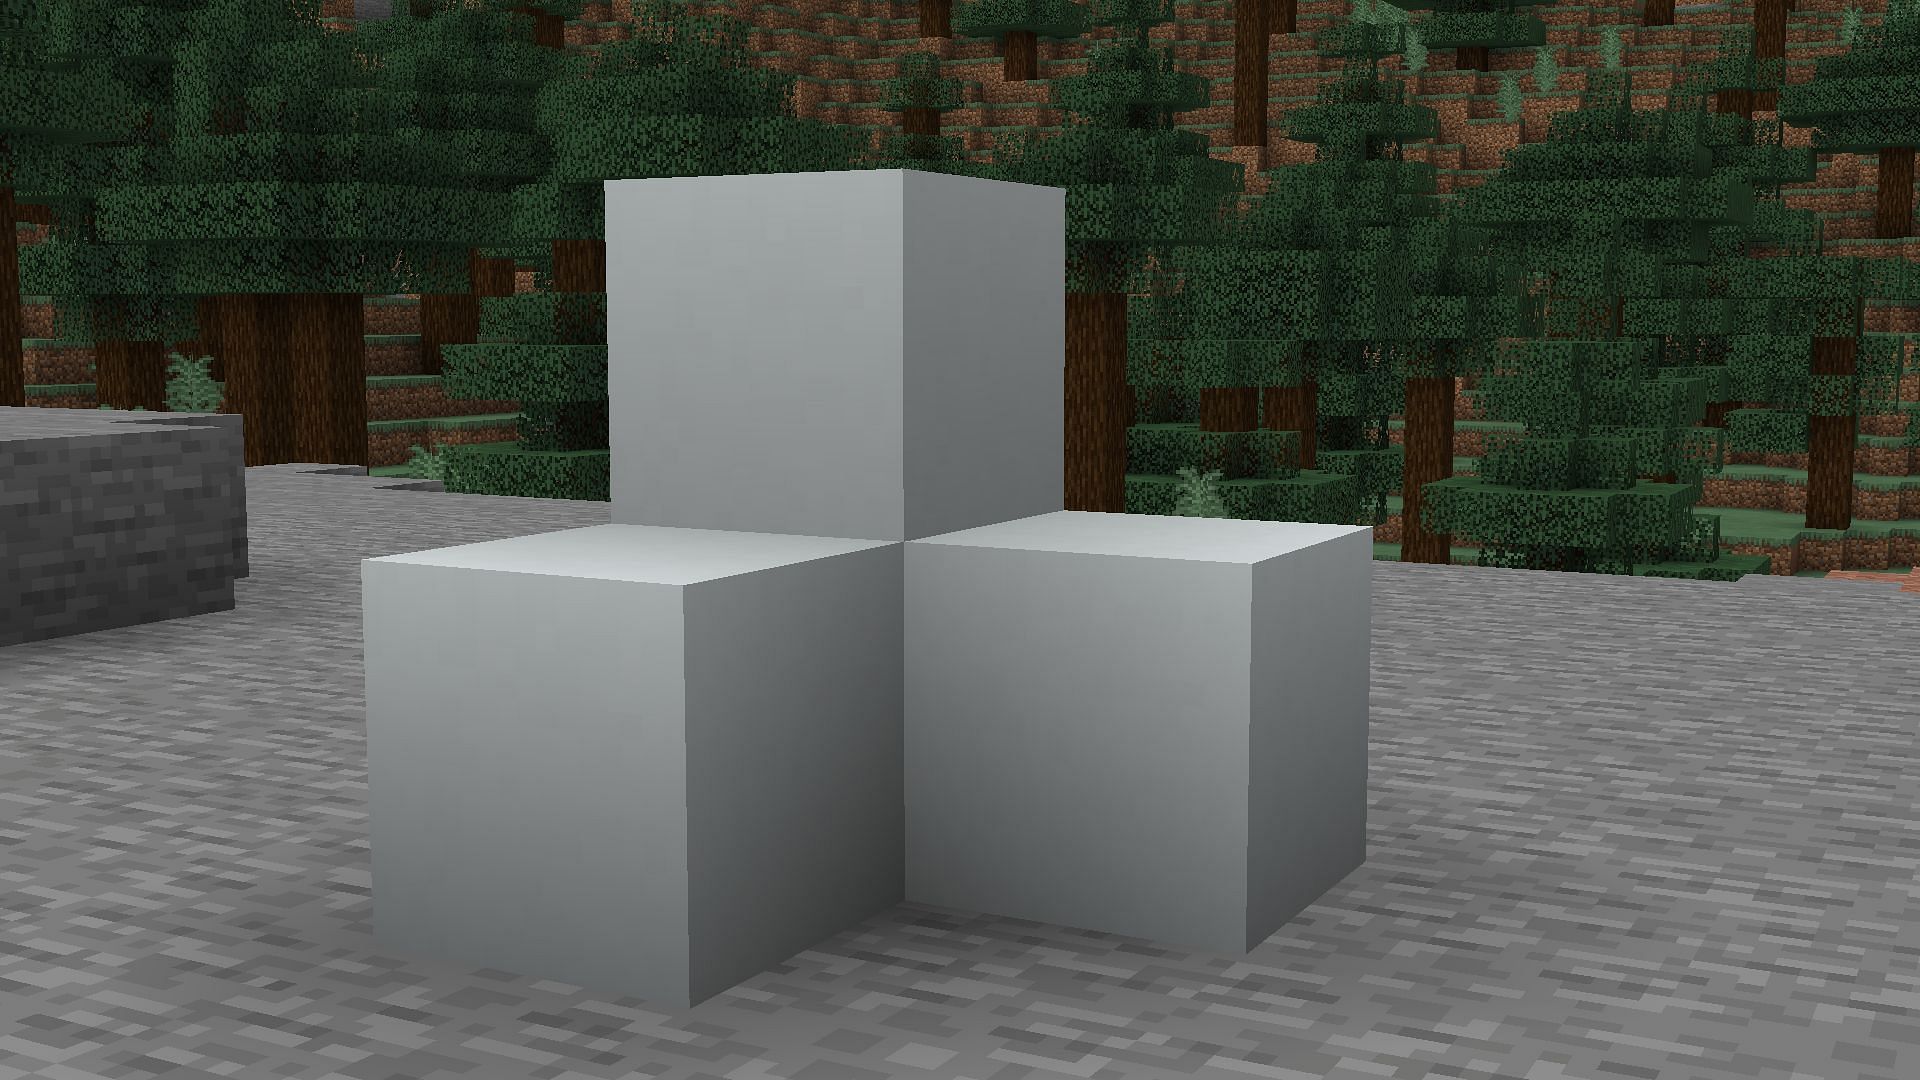 White concrete is the most popular variant of concrete blocks in Minecraft for building (Image via Mojang)